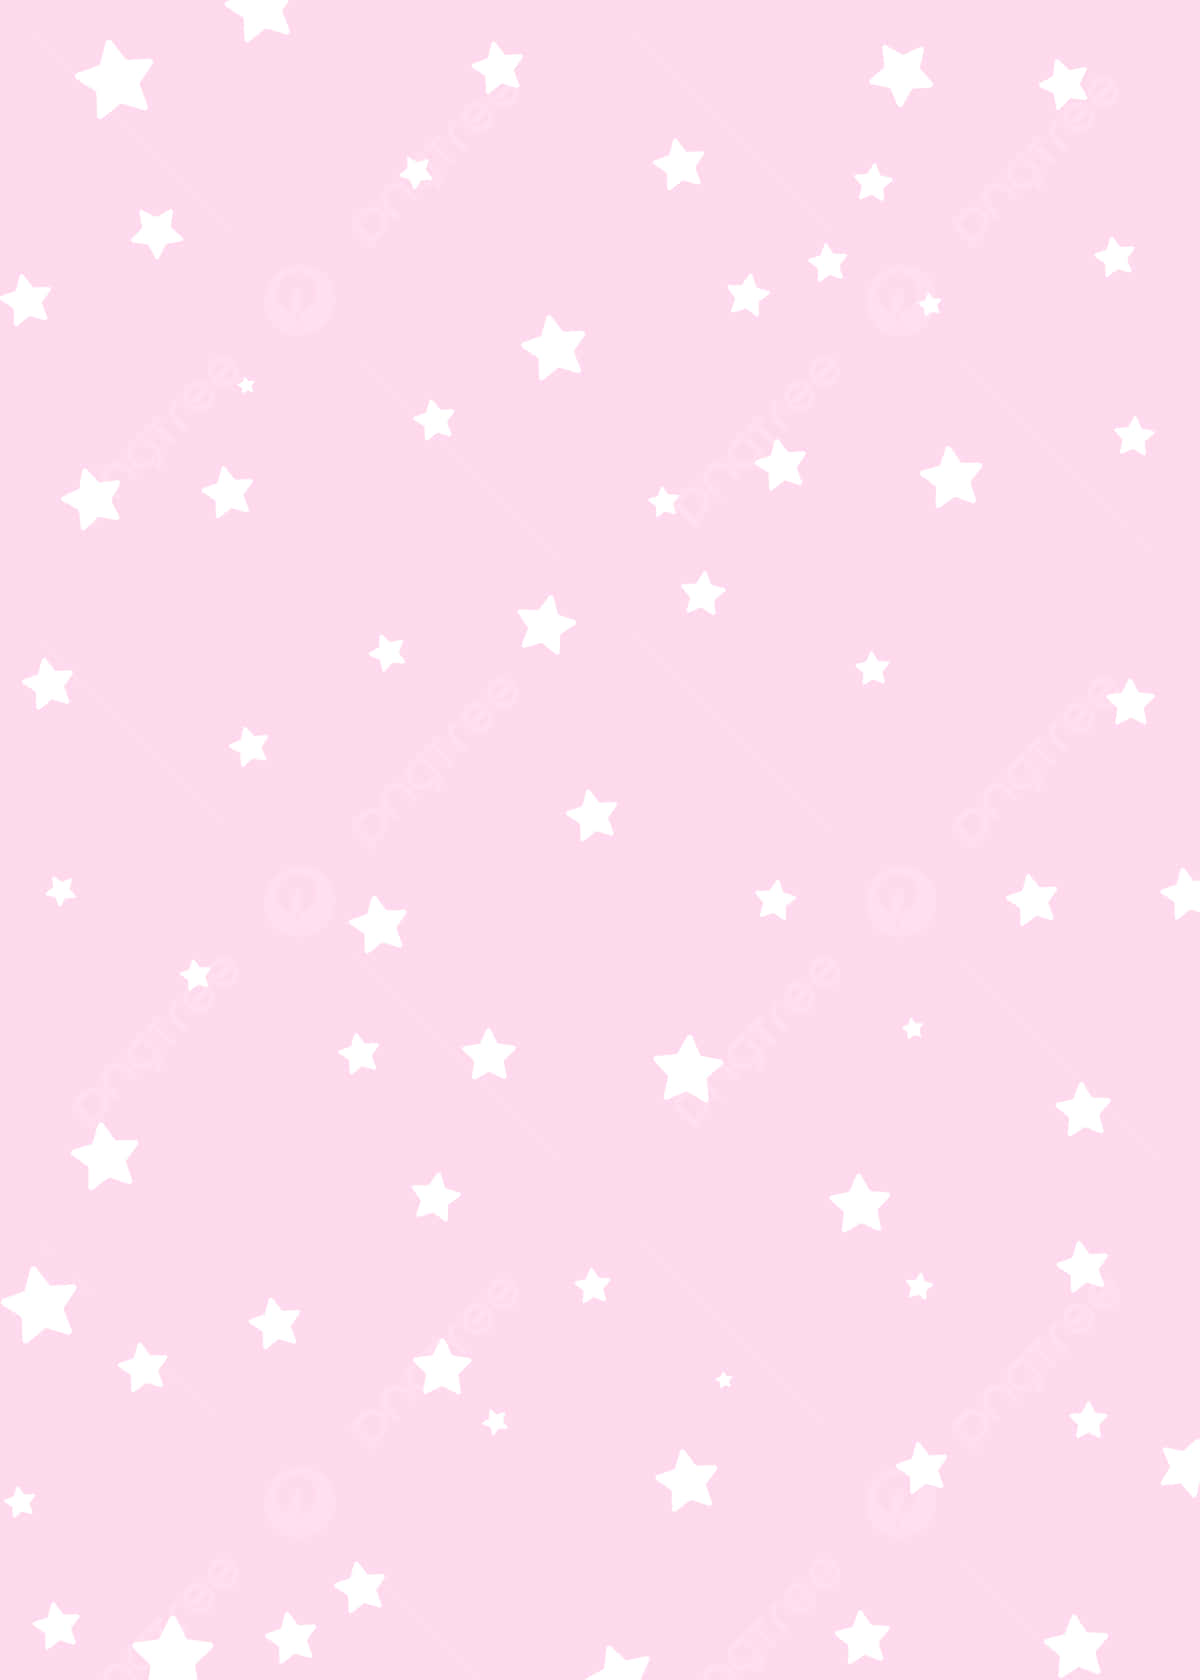 Delicate Light Pink Background Texture